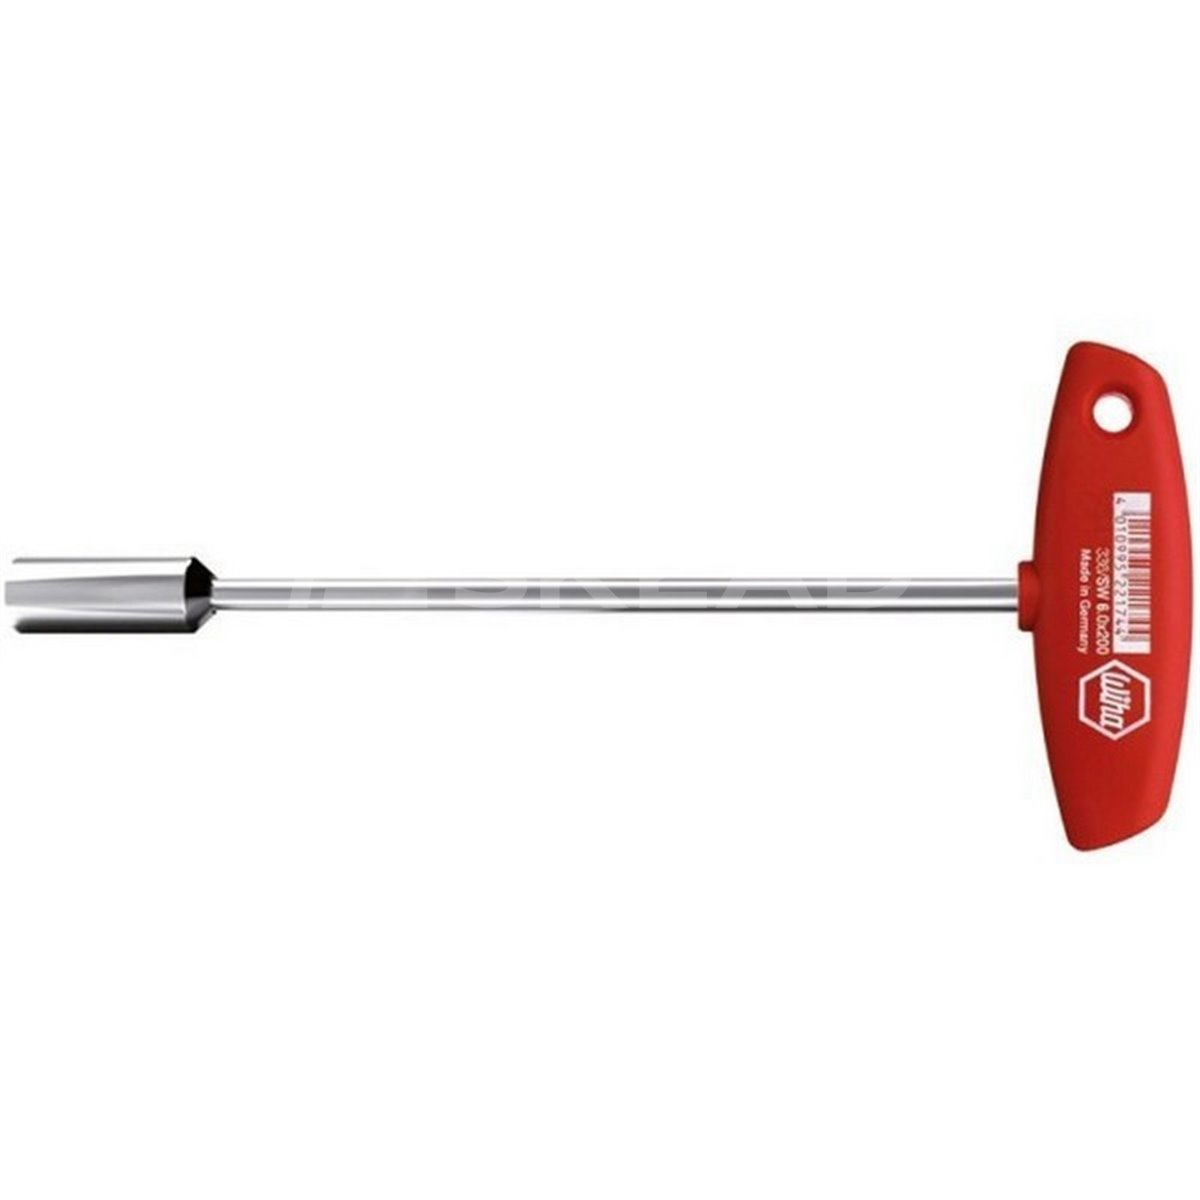 Socket wrench with T-handle. Classic 336 14 125mm Wiha 00991.